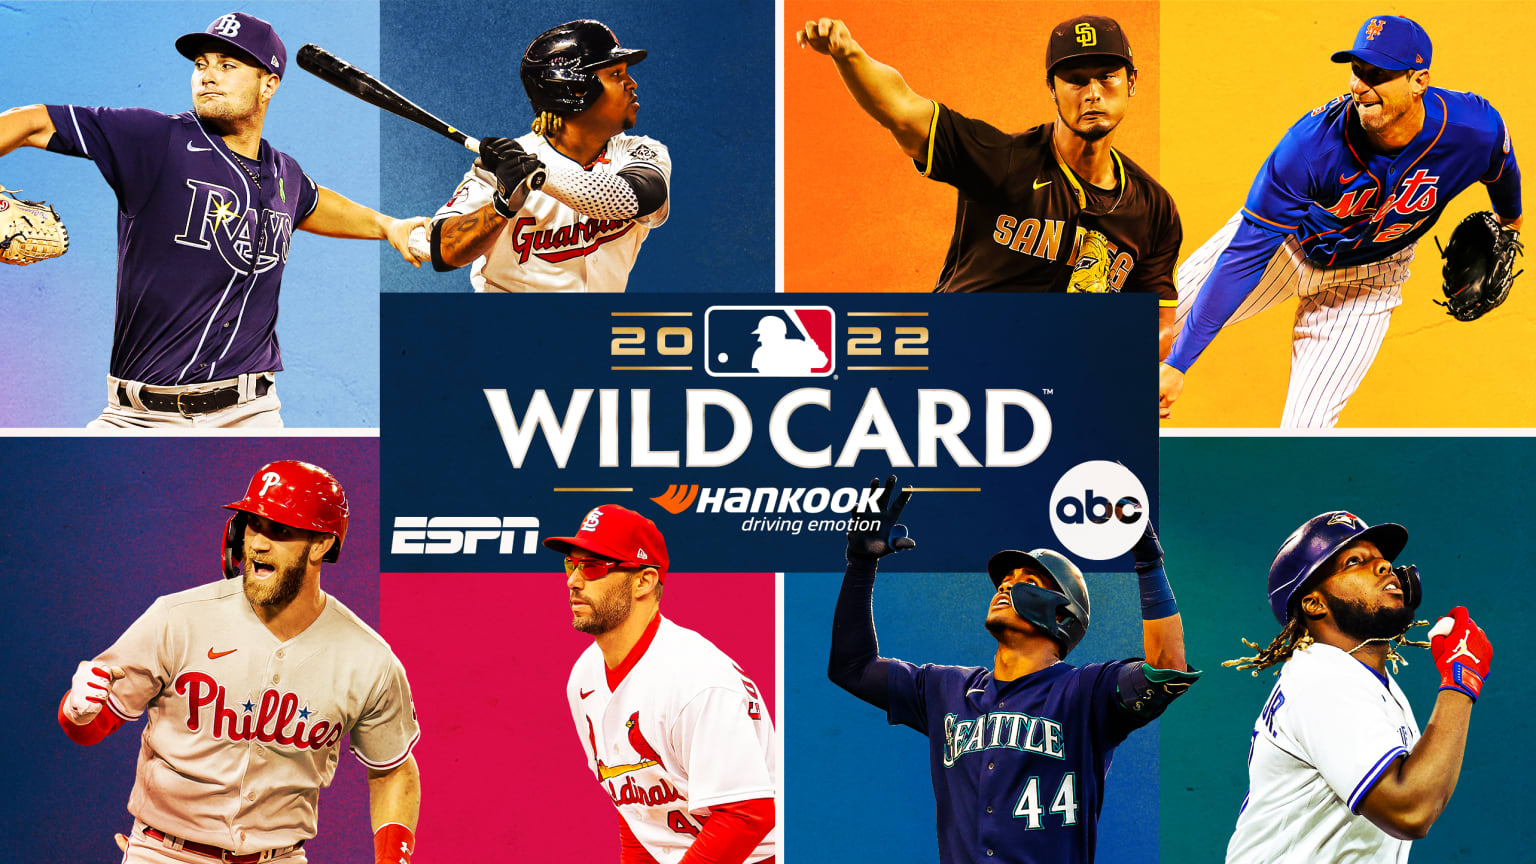 A photo illustration shows eight photos of players surrounding a Wild Card logo